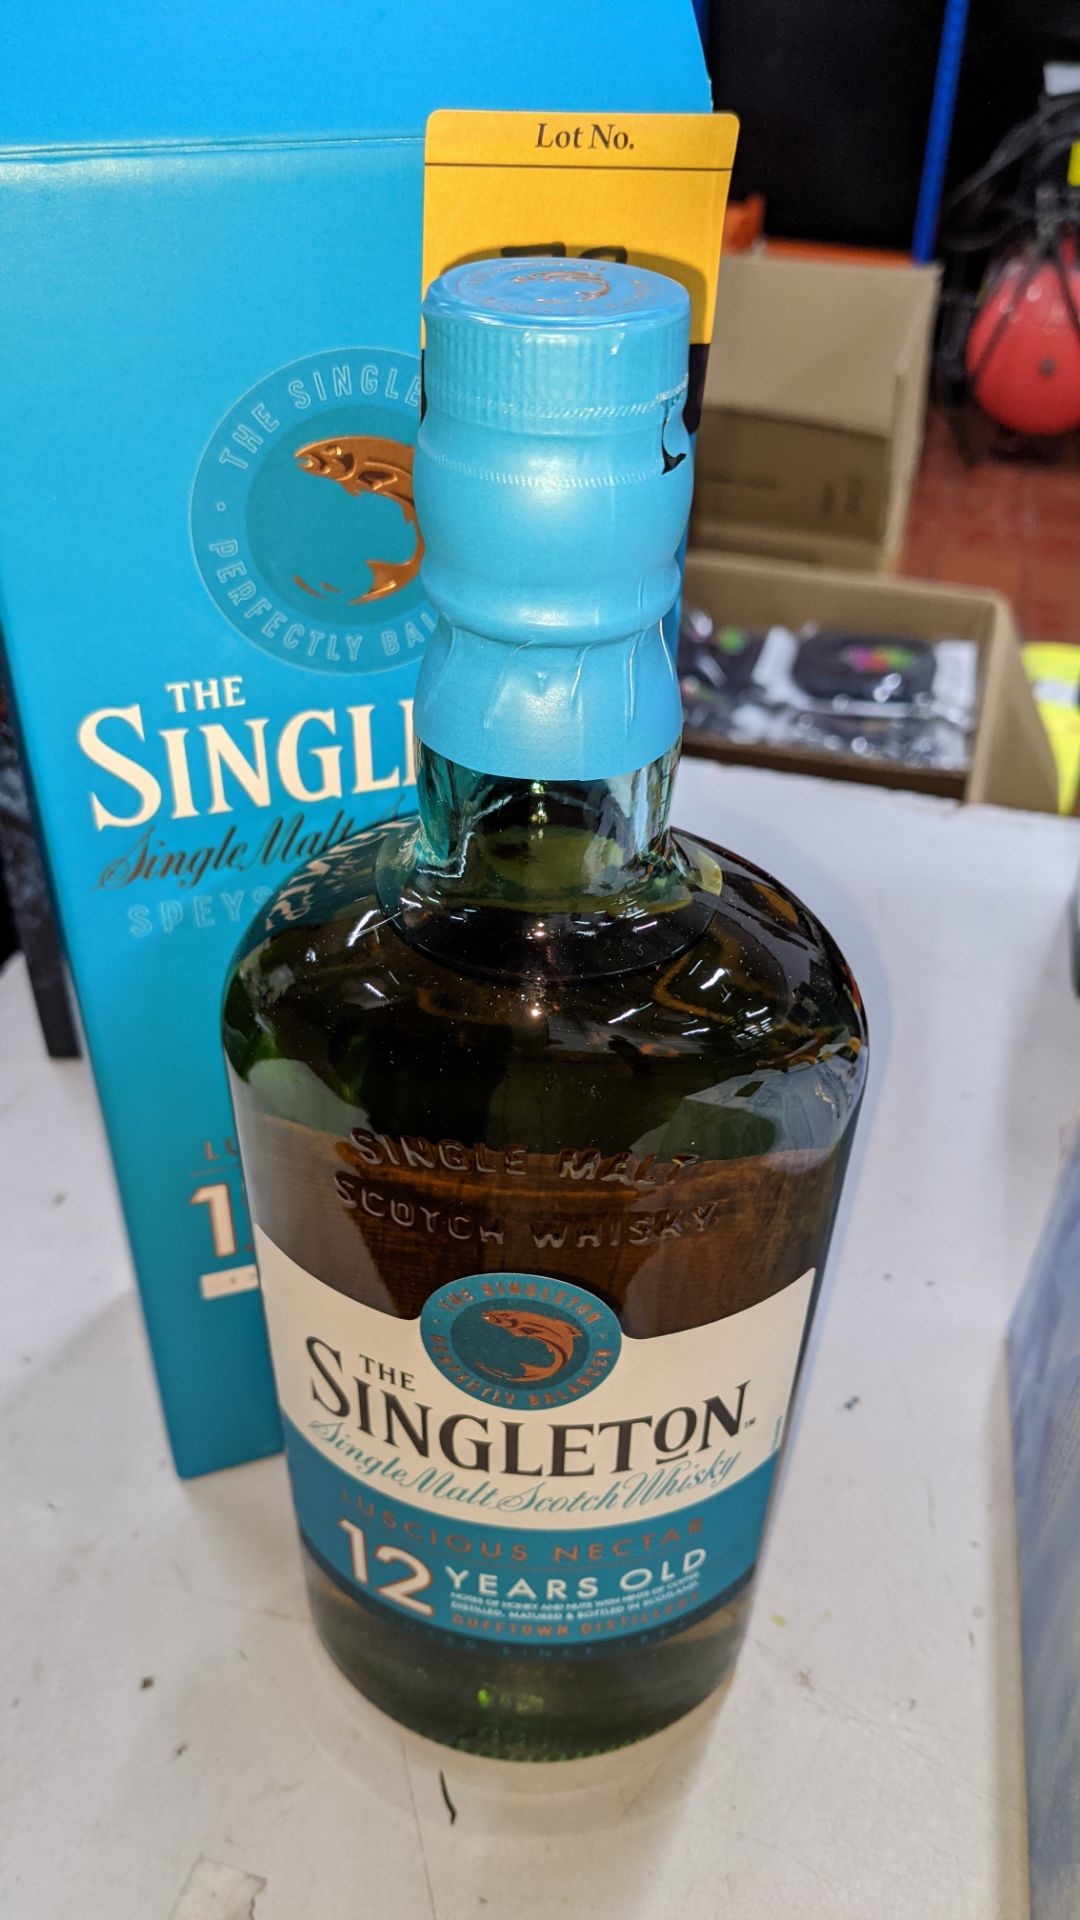 The Singleton Single Malt Scotch Whisky Luscious Nectar 12 year old Dufftown Distillery - 1 off 70cl - Image 5 of 5